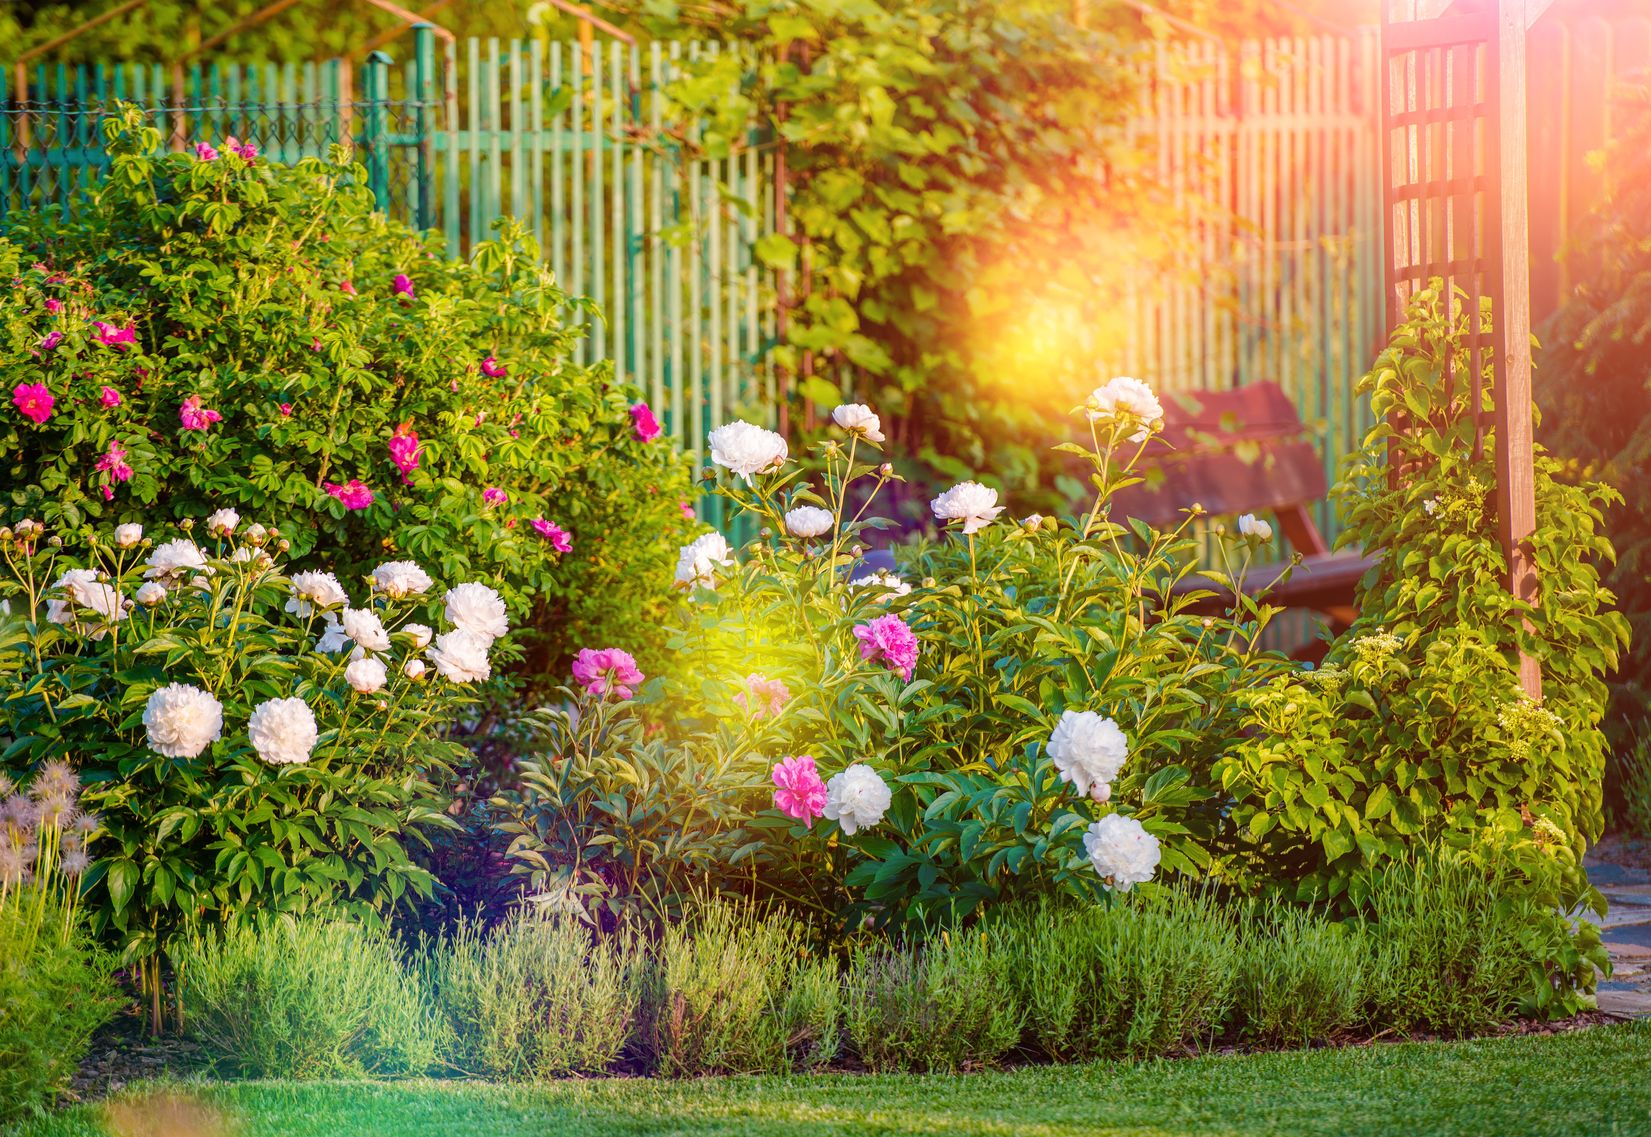 Garden filled with pink and white peony flowers, vines and other flowers flooded in a ray of sunlight